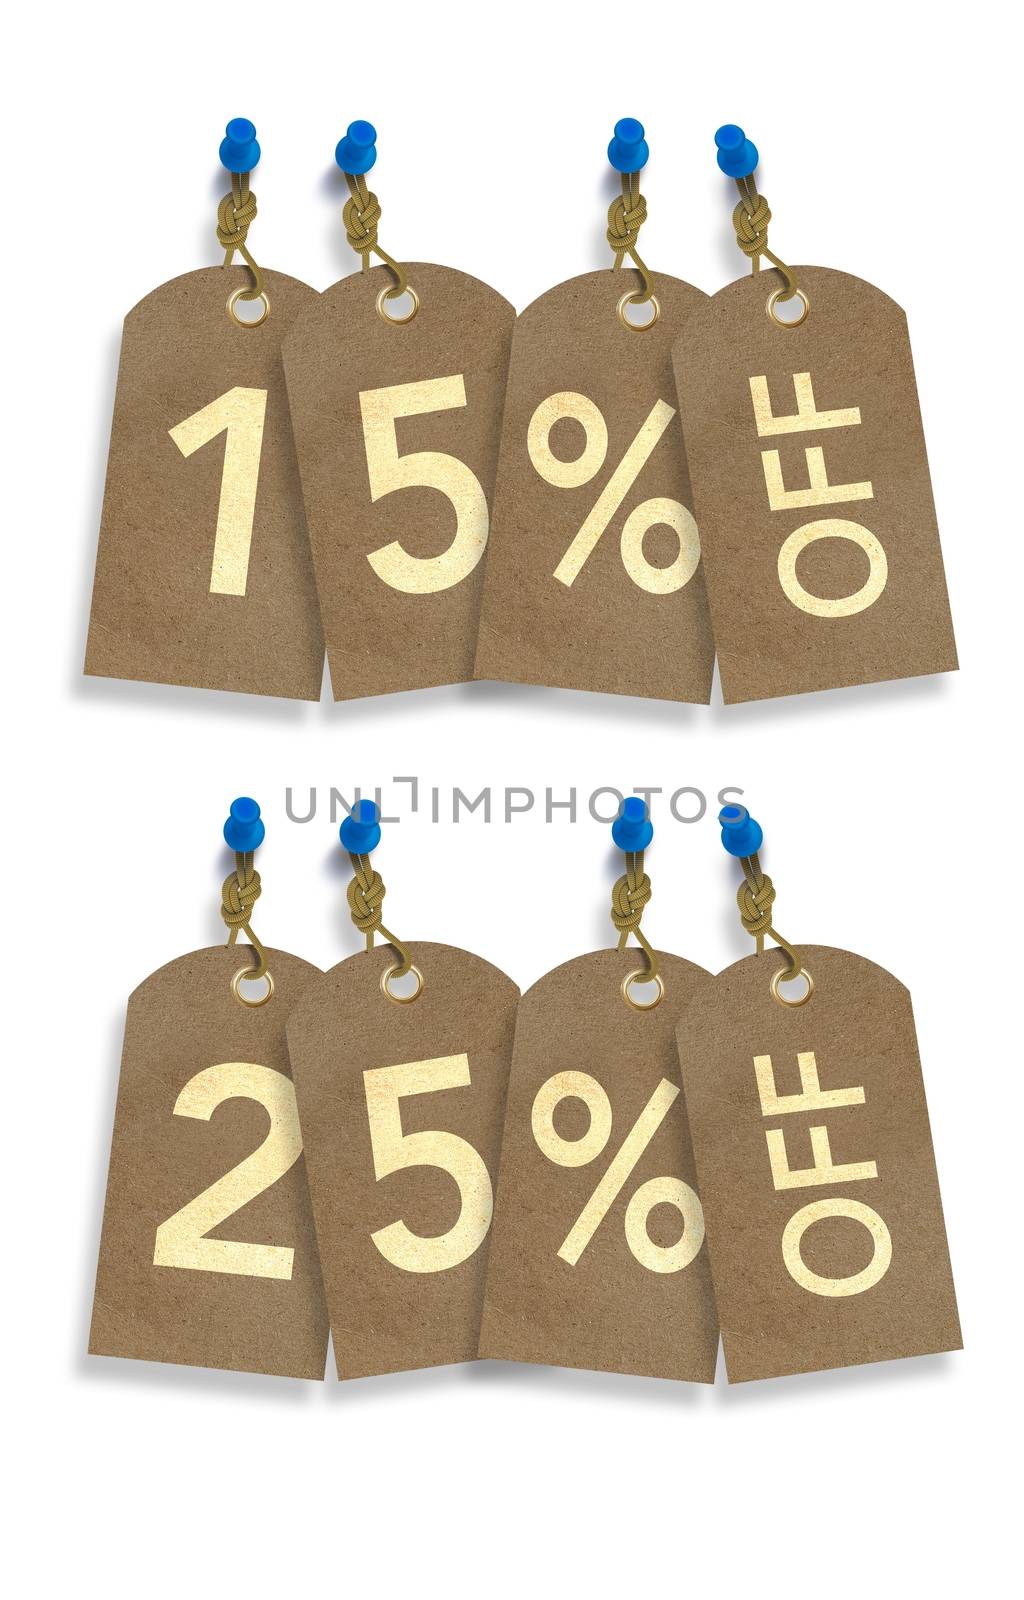 Sale Paper Tags Discount by welcomia